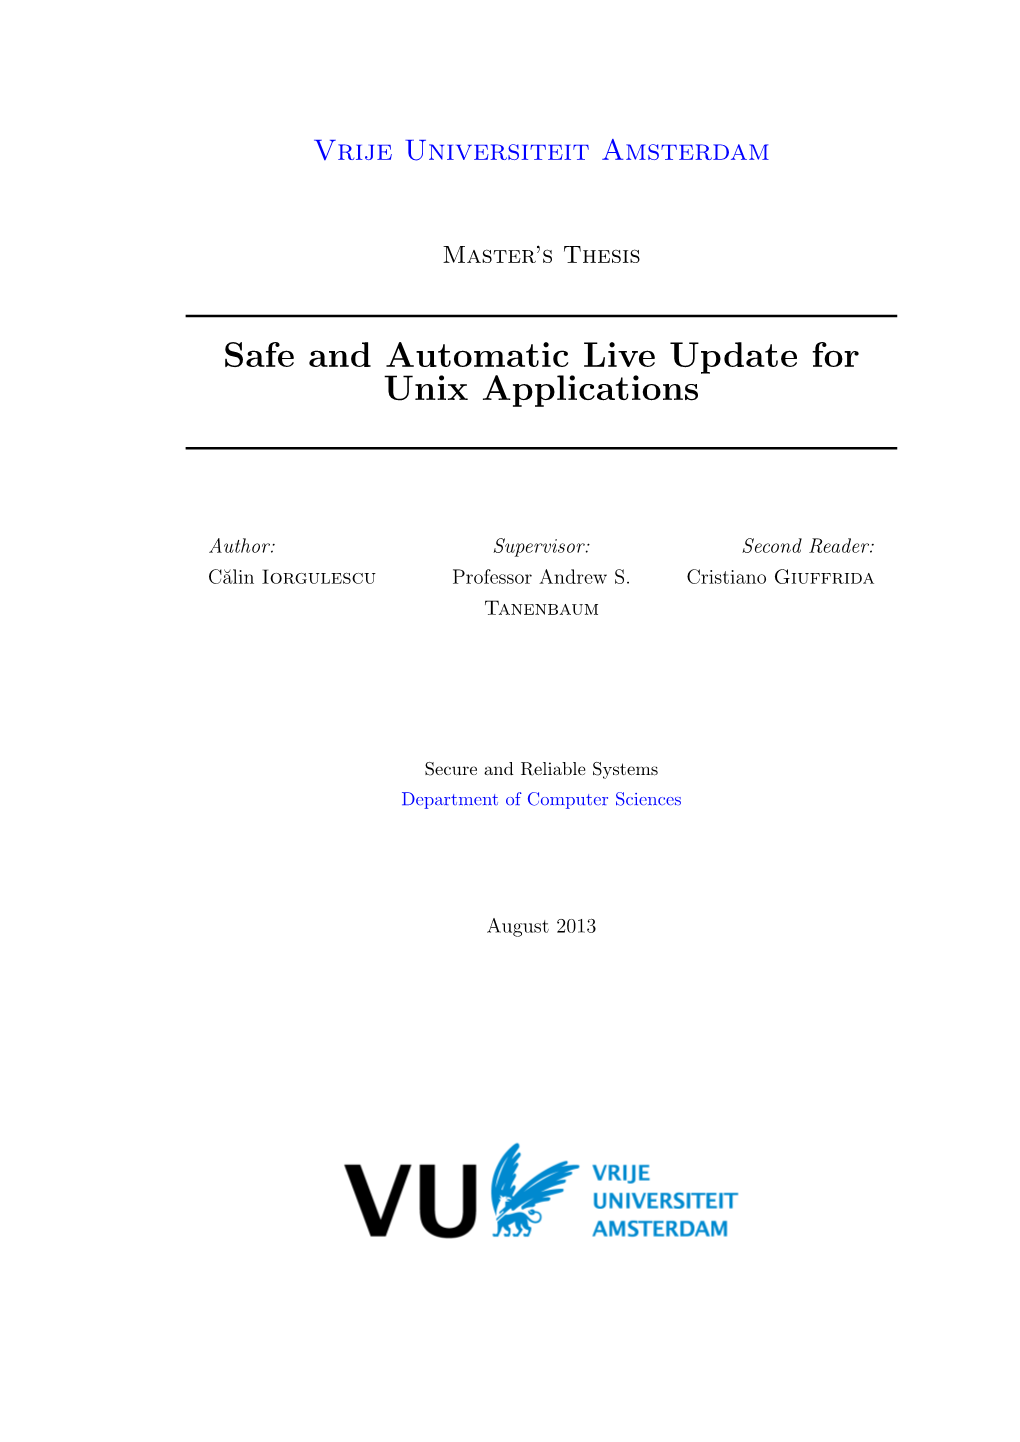 Safe and Automatic Live Update for Unix Applications